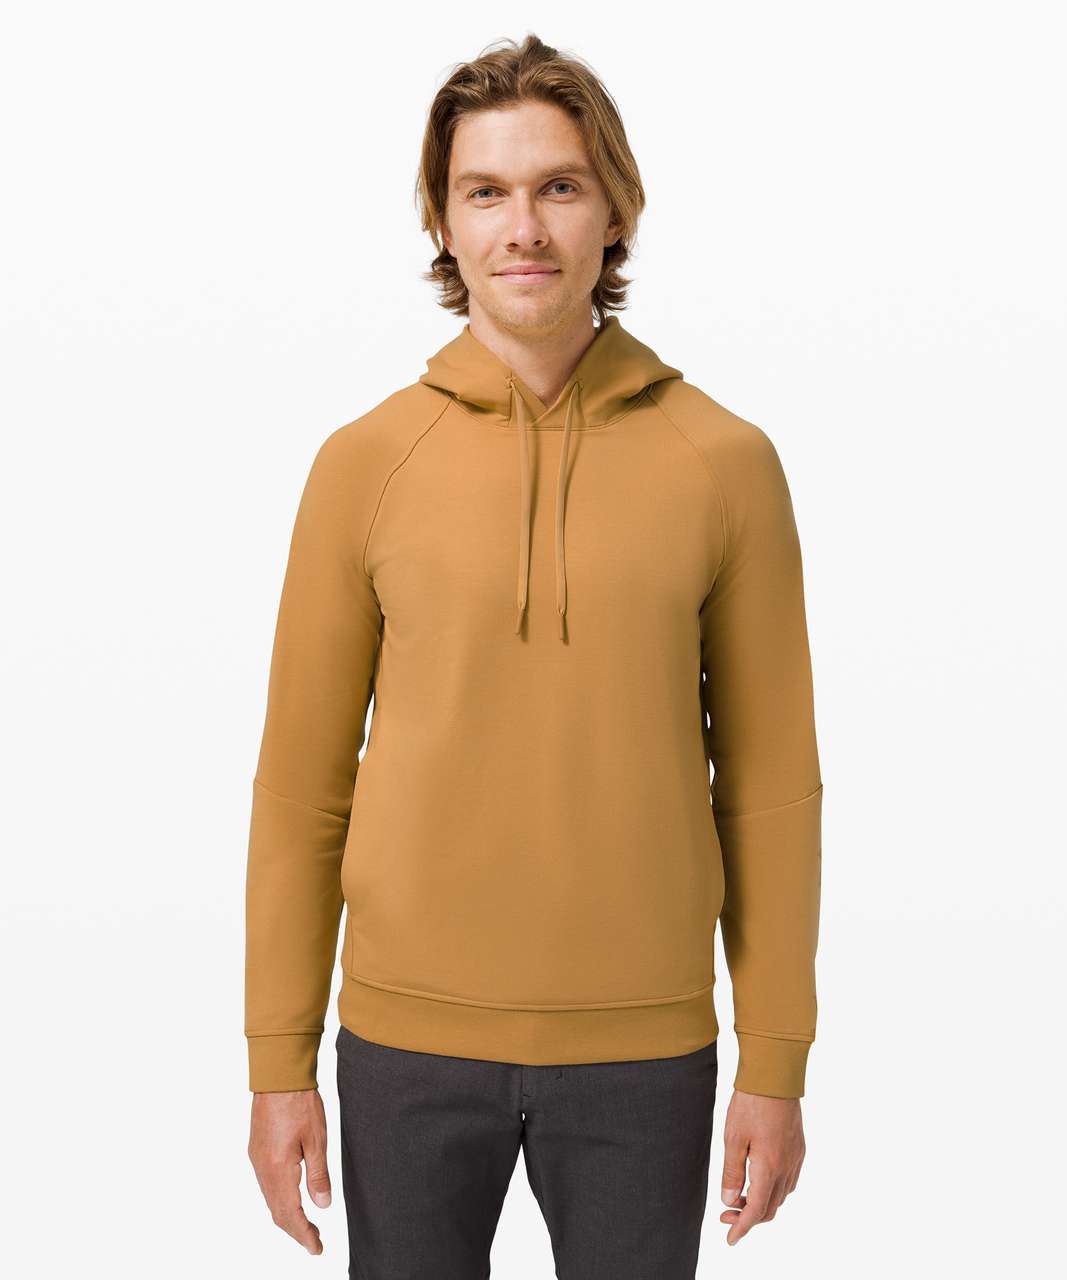 Lululemon City Sweat Pullover Hoodie French Terry - Gold Buff